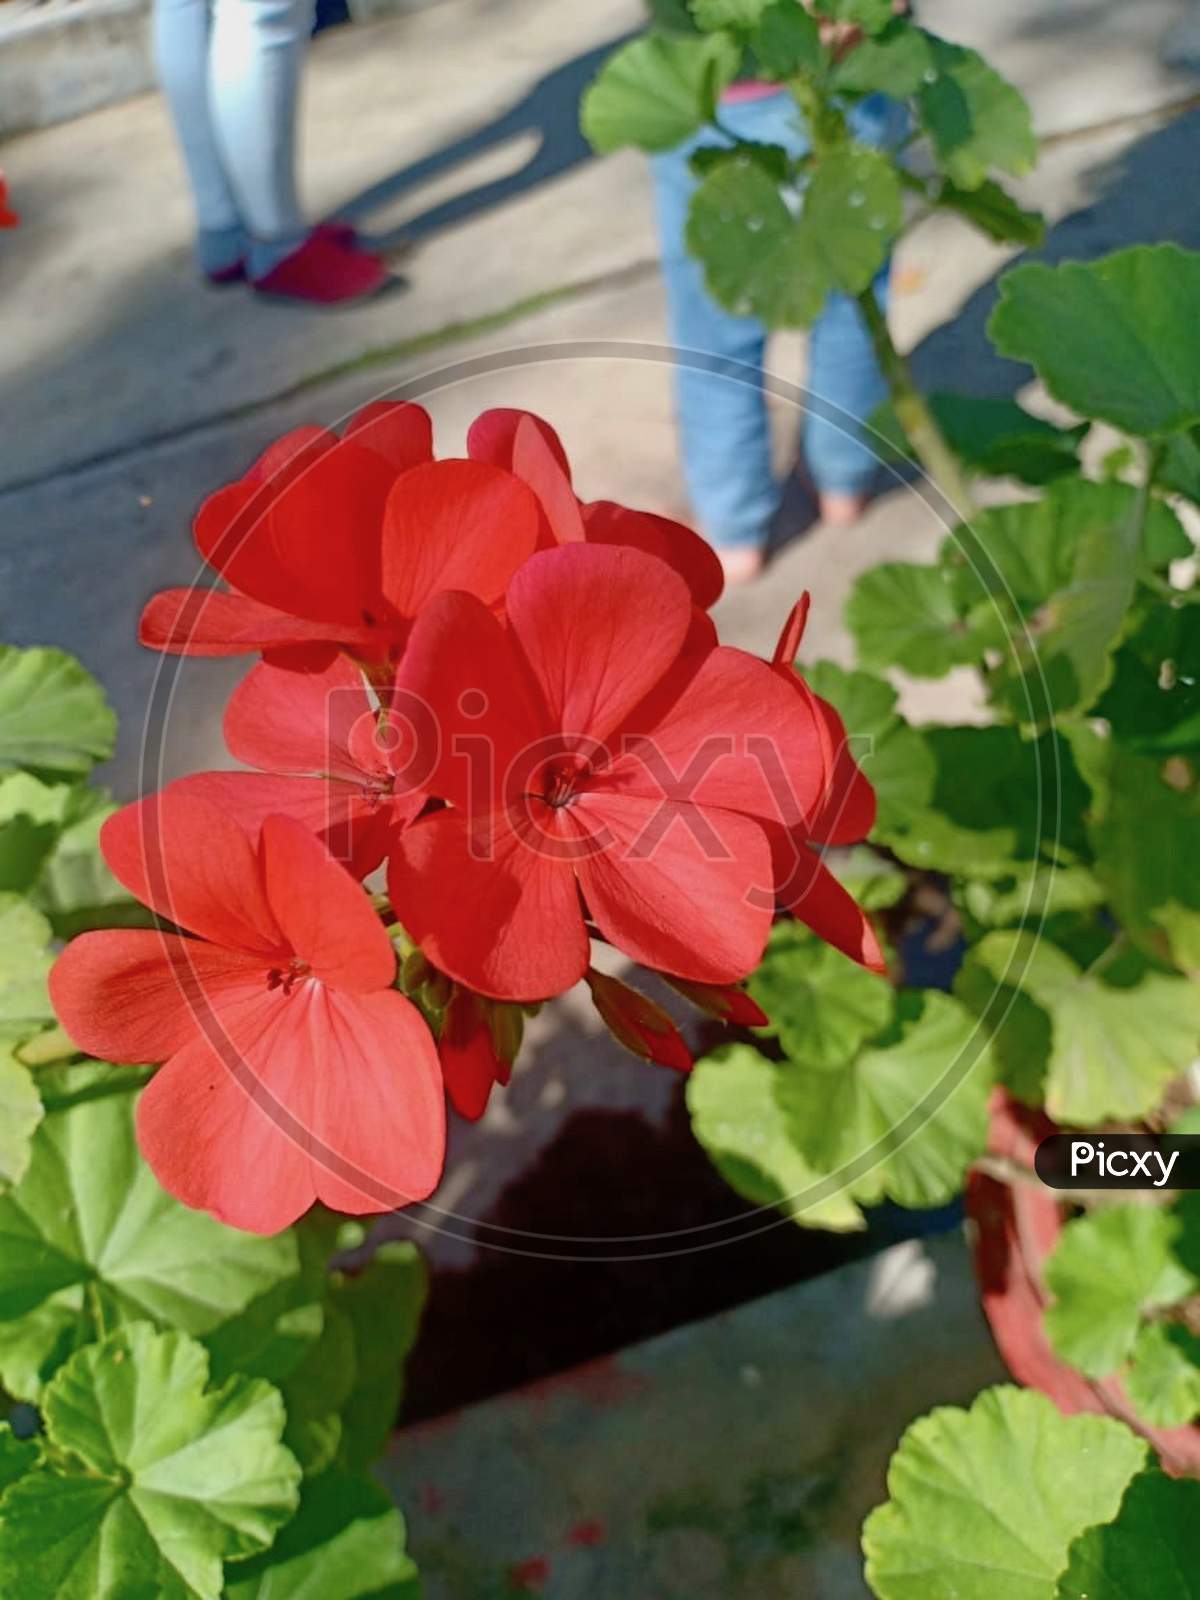 Red Flower in Garden Stock Photos.This Photo Is Taken In Ranchi,Jharkhand ,India 2020